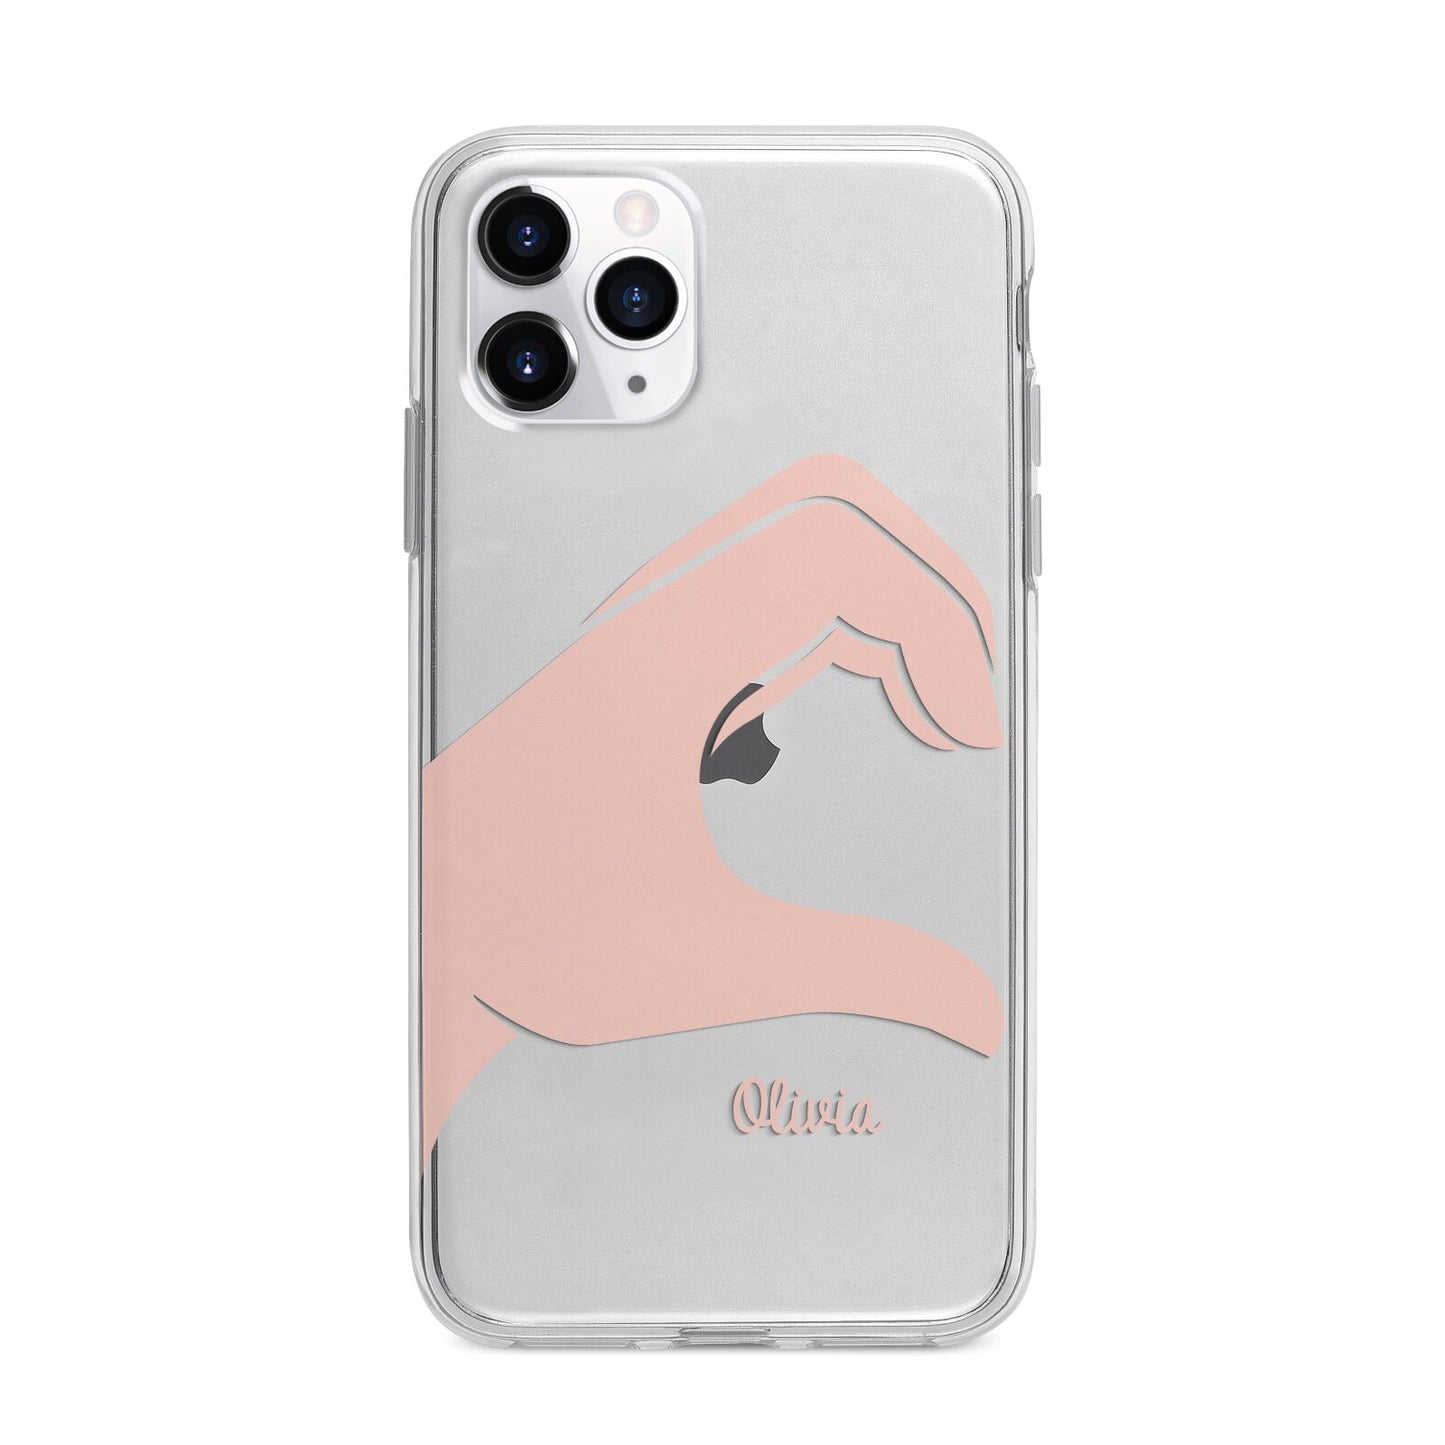 Left Hand in Half Heart with Name Apple iPhone 11 Pro Max in Silver with Bumper Case